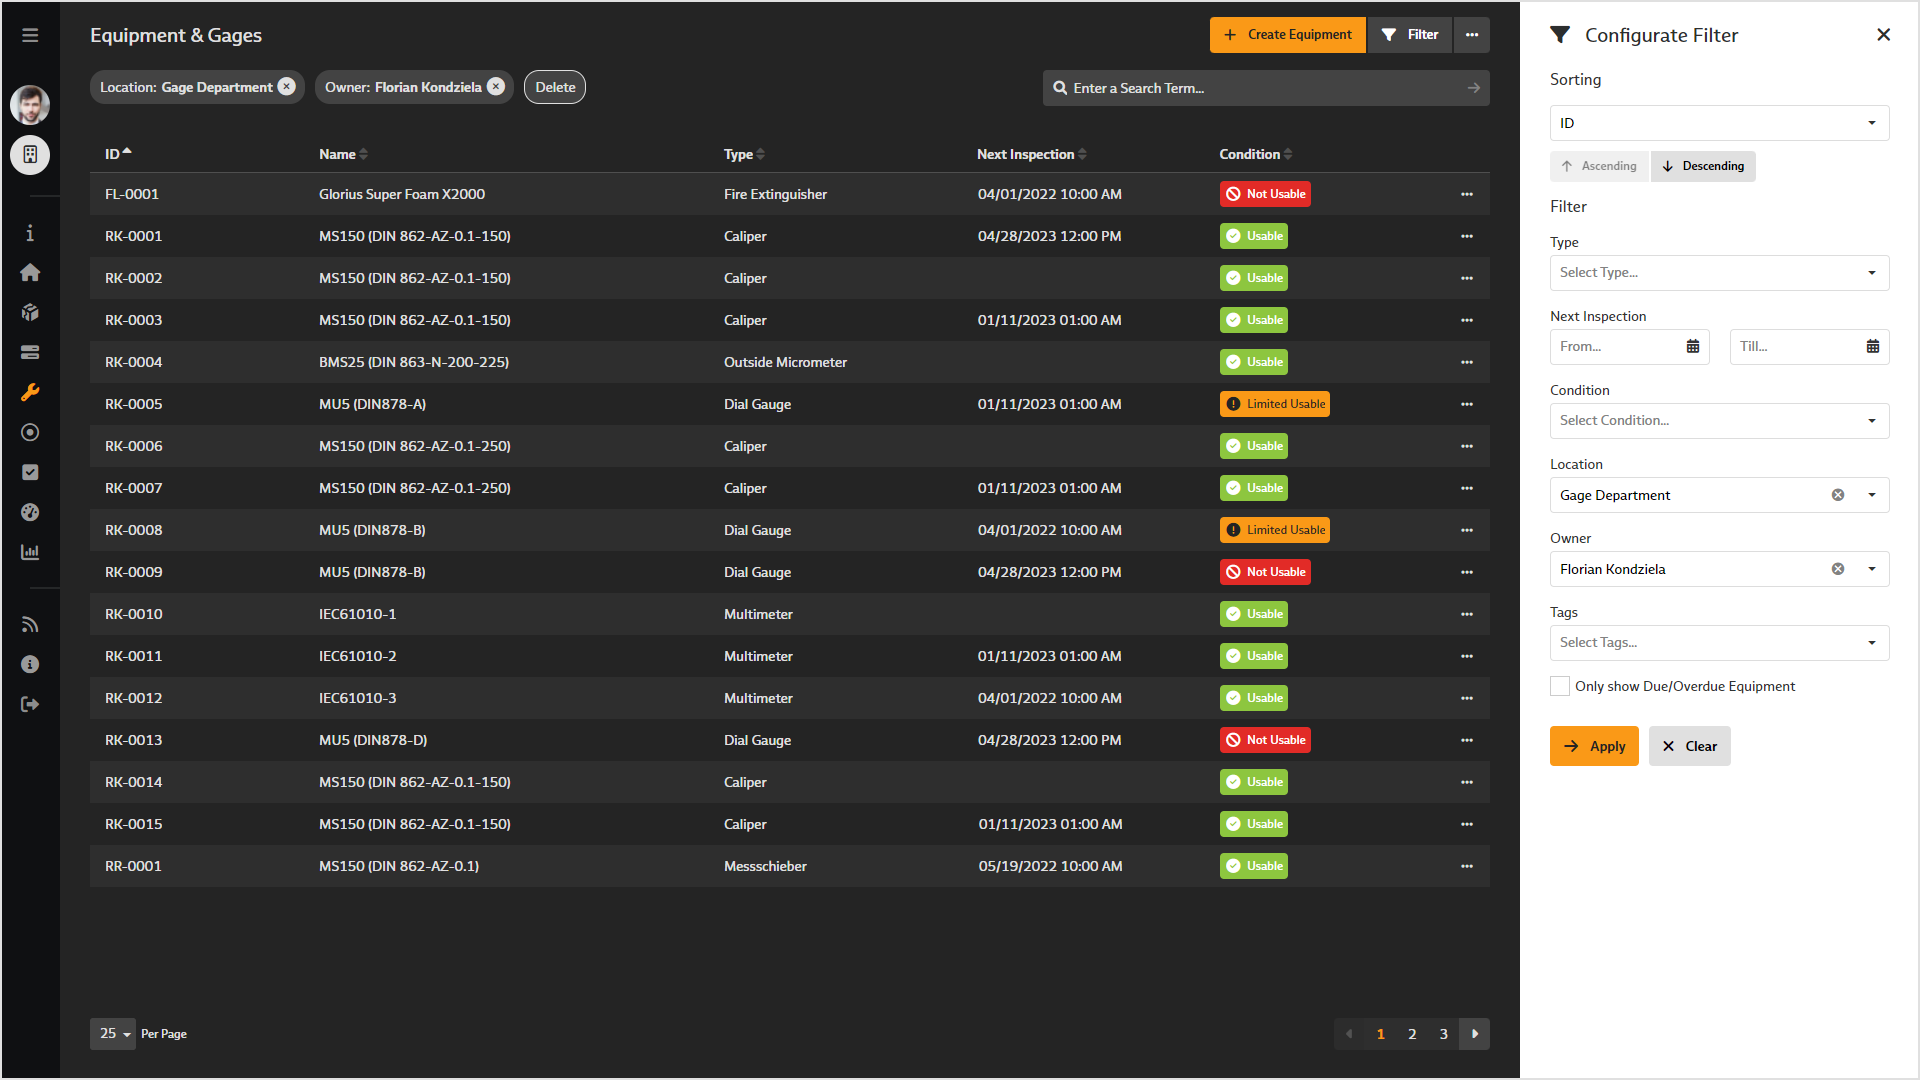 Screenshot of "Equipment & Gages" in the BabtecQube: Overview